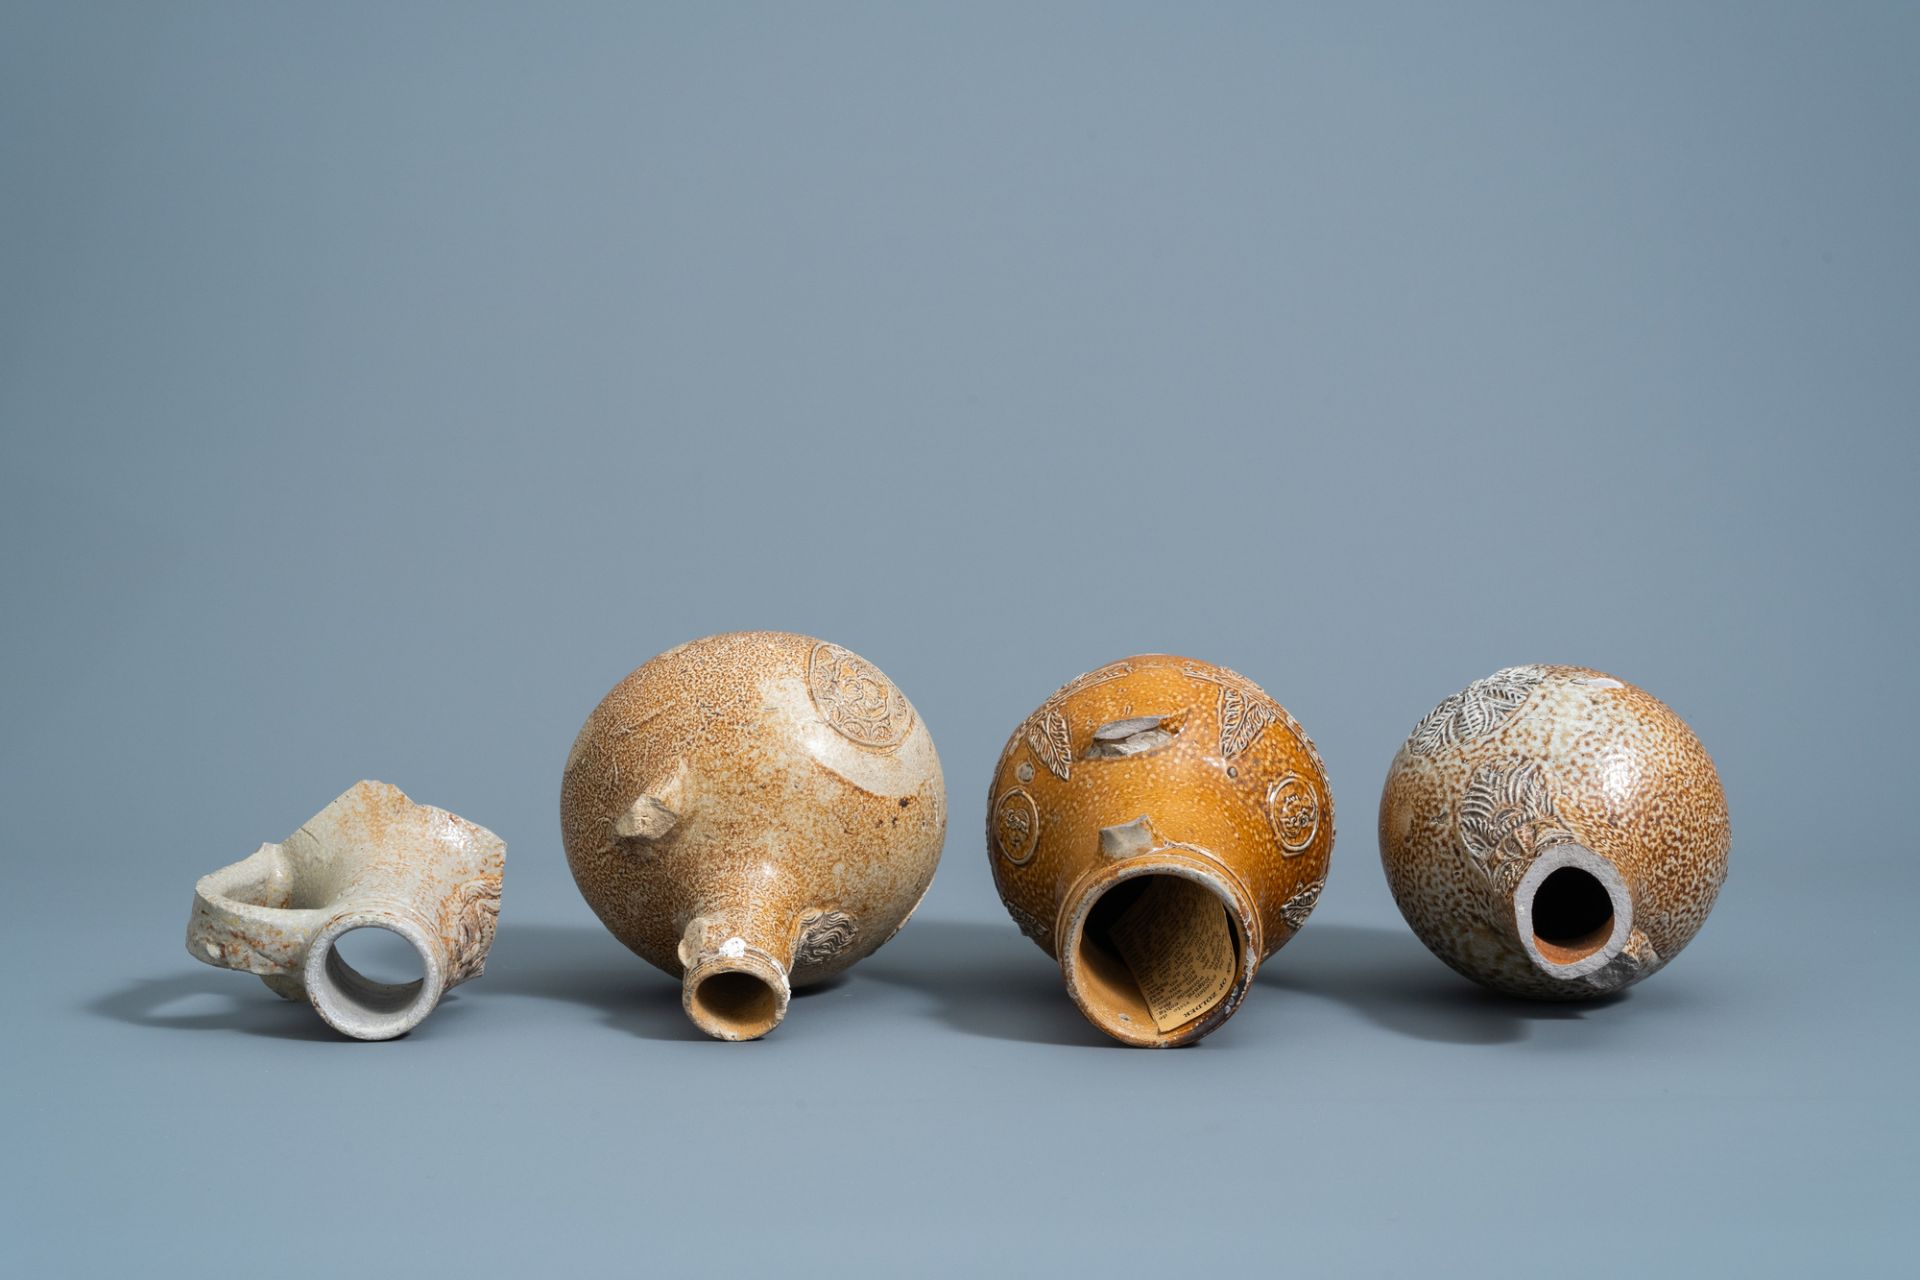 Three German stoneware bellarmine jugs and a neck fragment, 16th/17th C. - Image 7 of 8